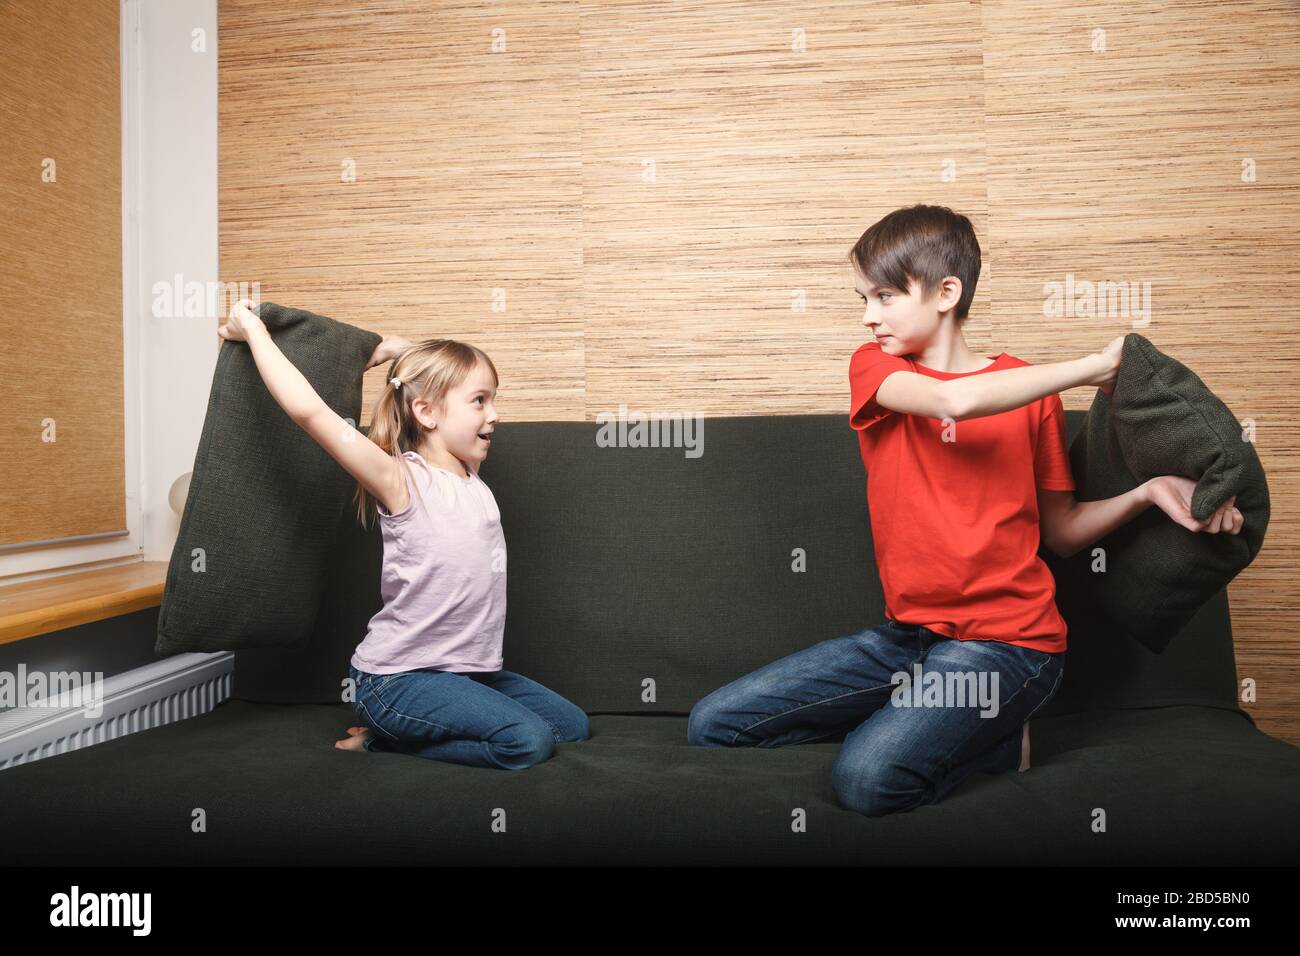 Siblings fighting with pillows stuck at home being in self-isolation. Quarantine and lockdown protective measures against spreading of coronavirus pan Stock Photo